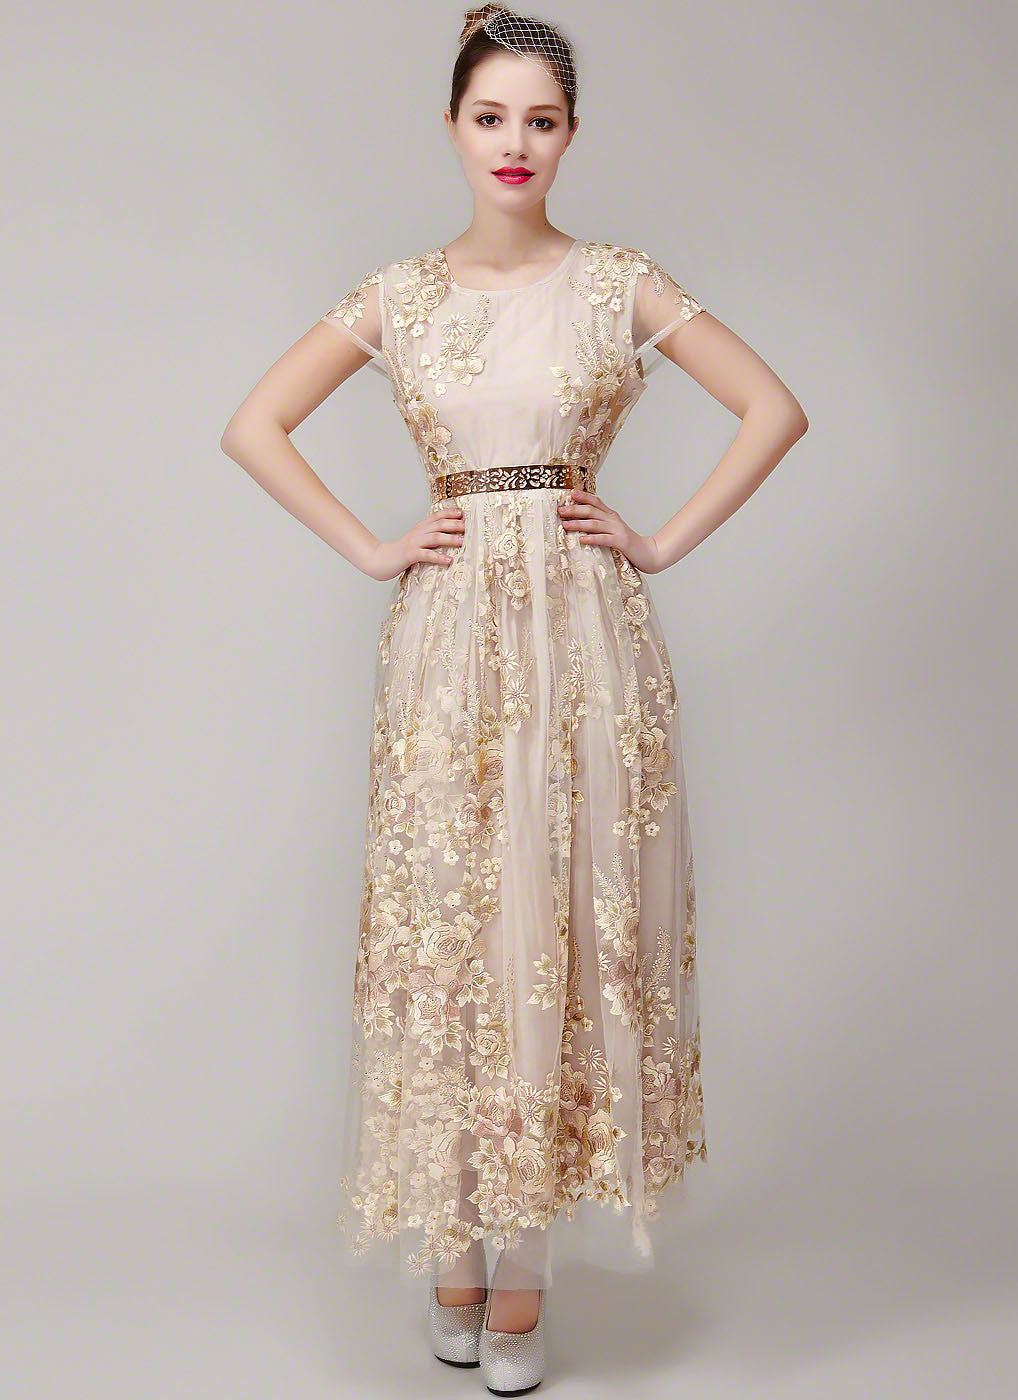 Champagne Color Tulle Lace Floral Embroidered Maxi Length Evening